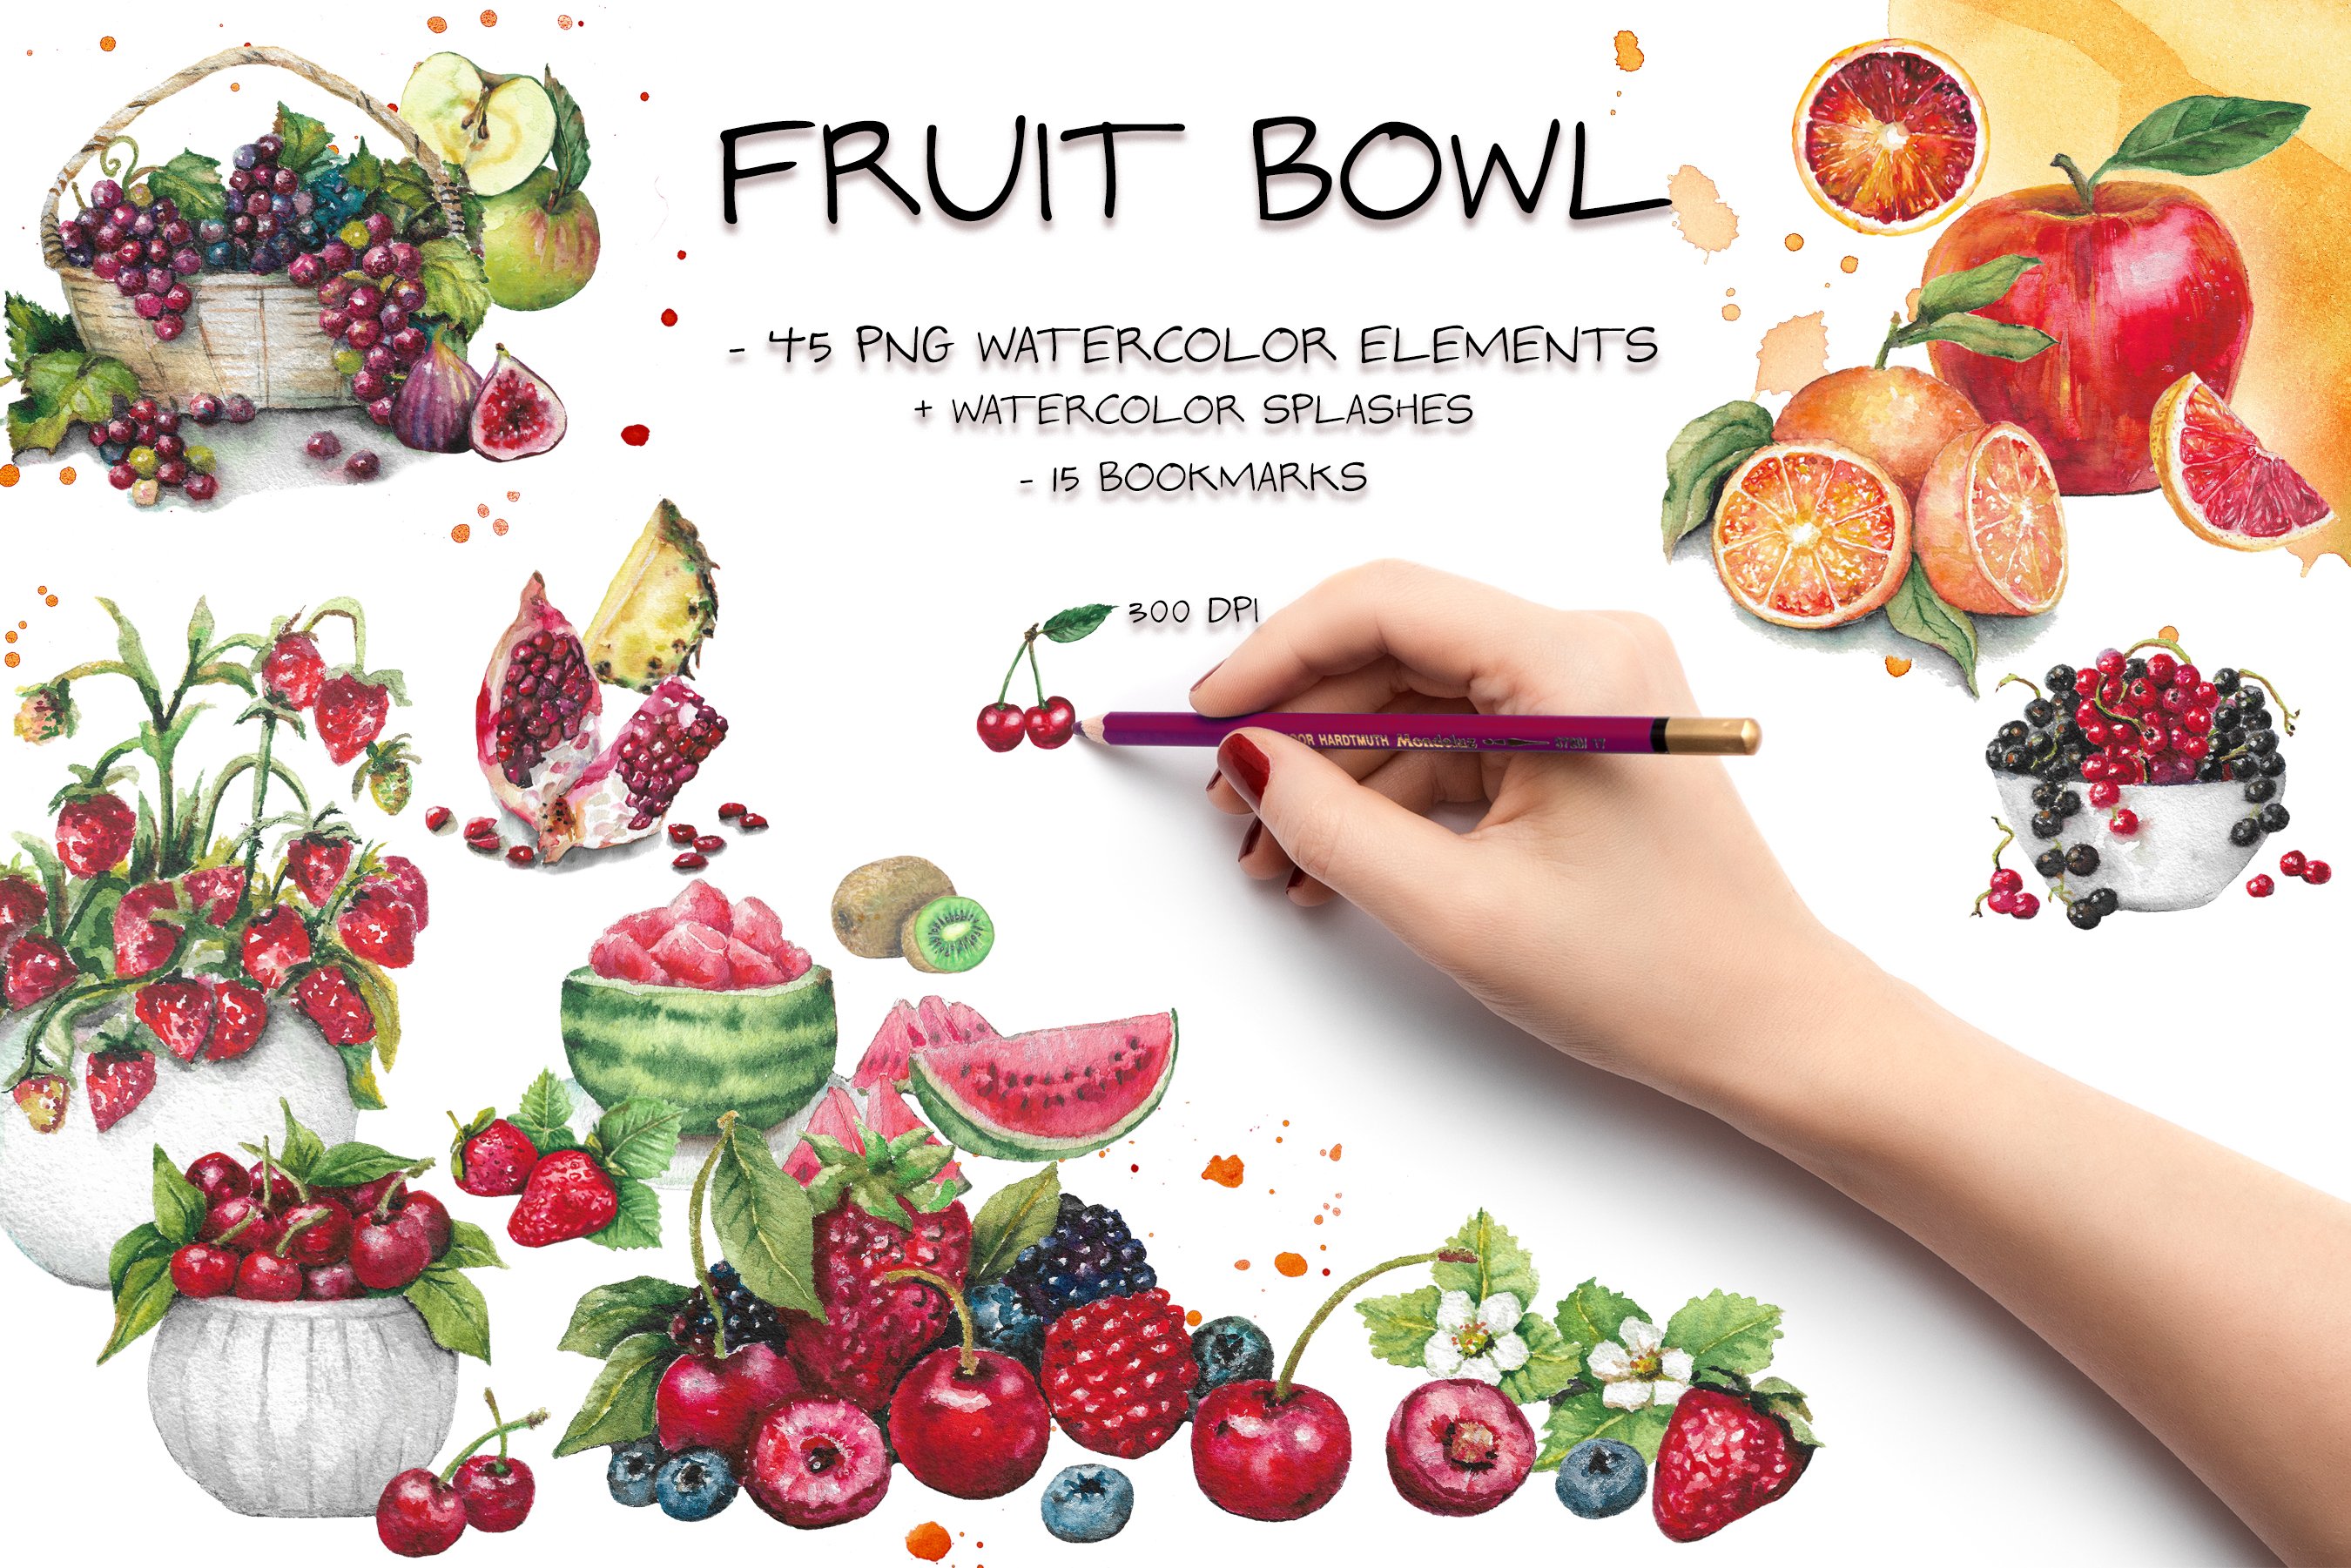 How to Draw a Basket of Fruit: 14 Steps (with Pictures) - wikiHow